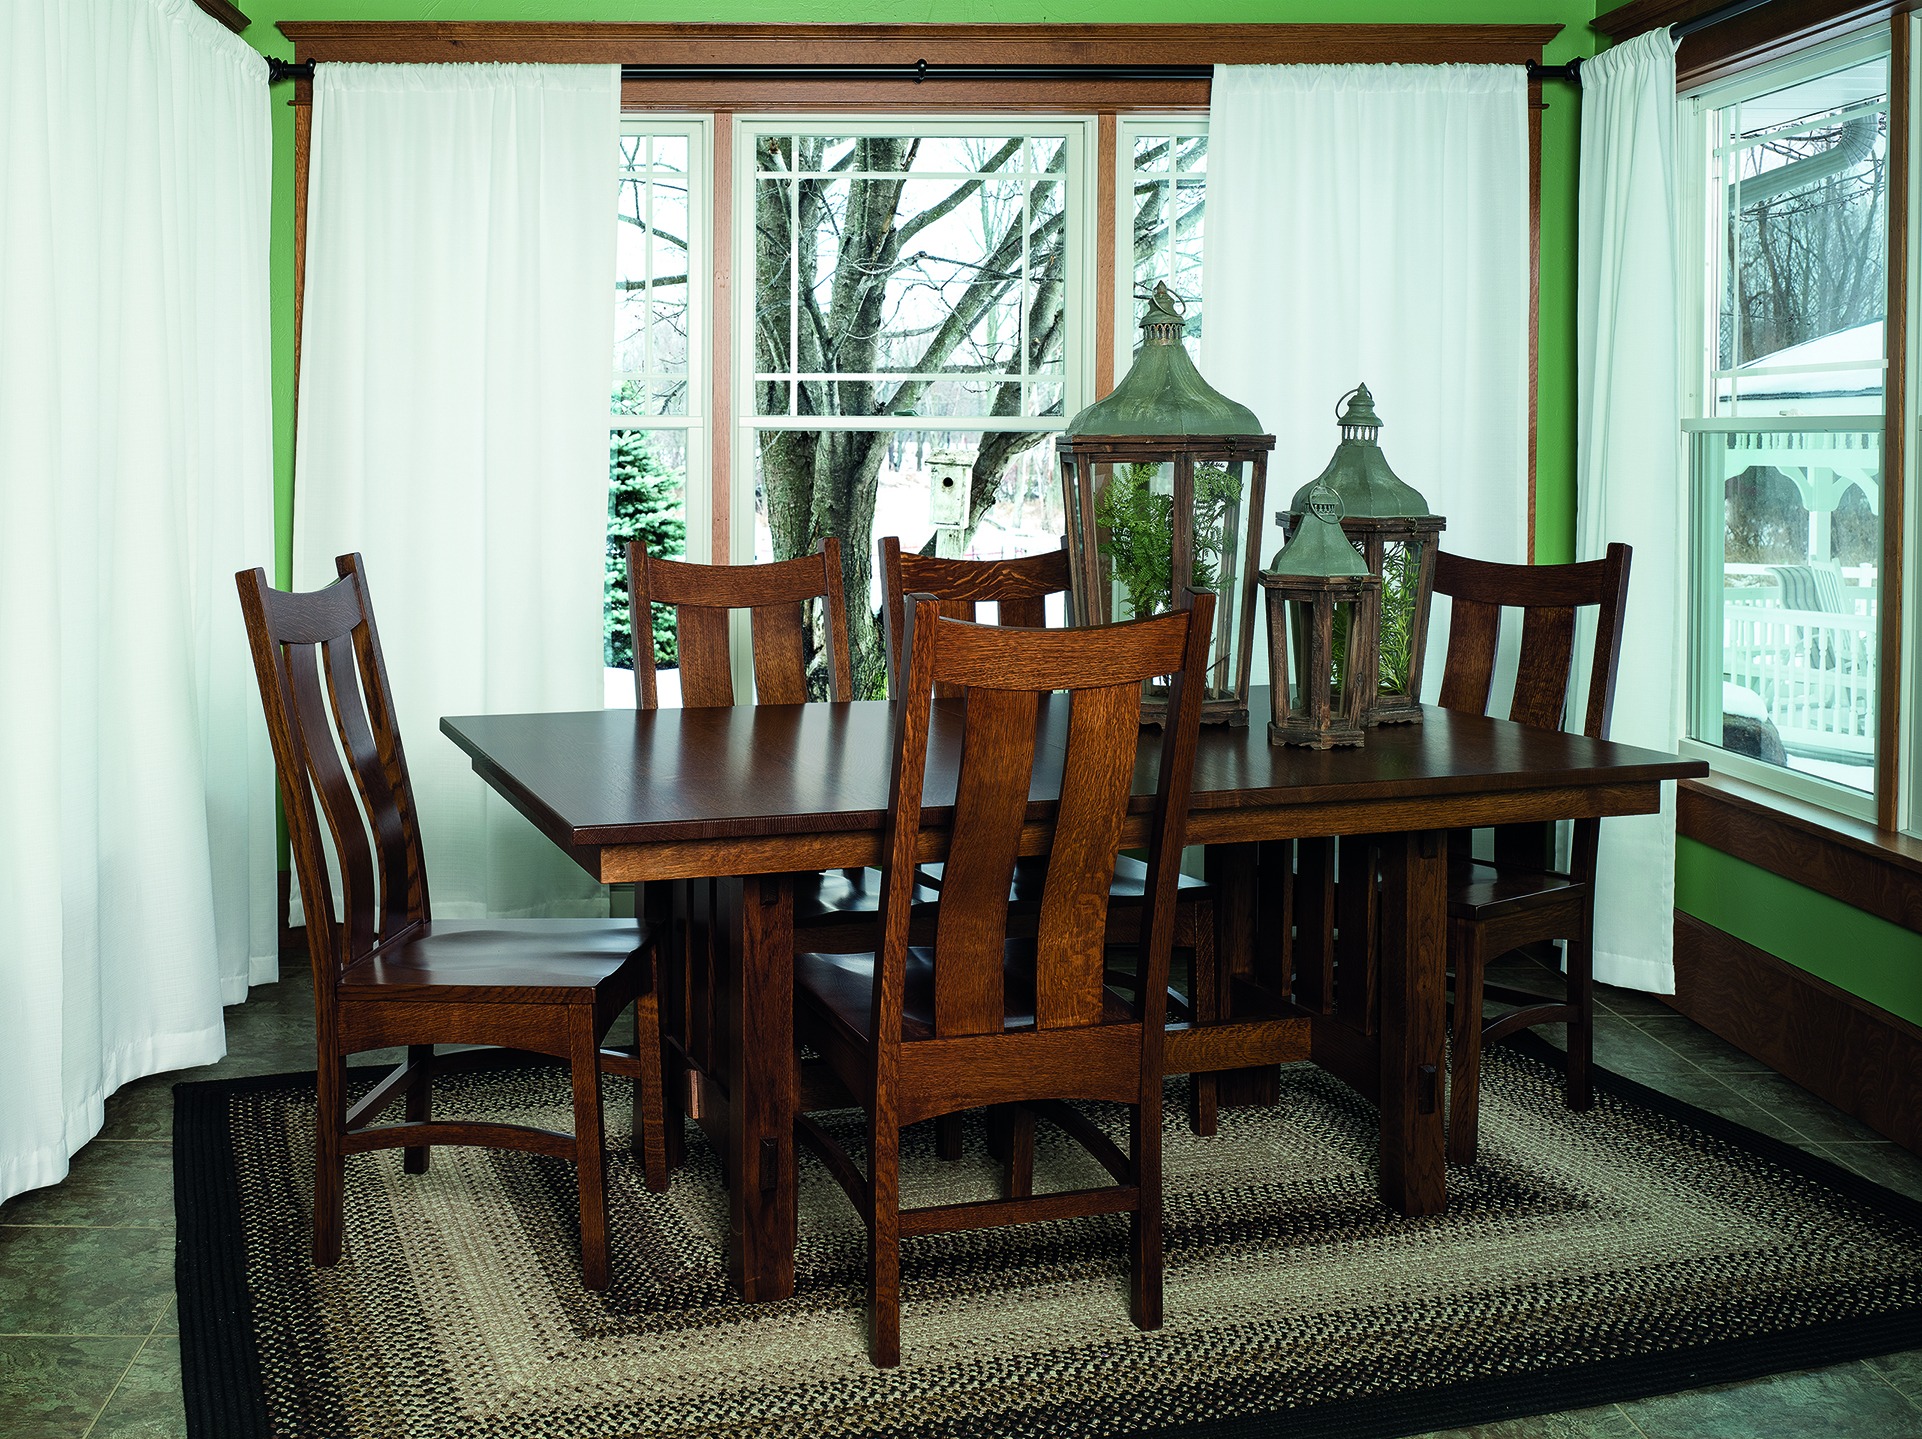 Goshen Dining Collection By Fusion Designs Stewart Roth Furniture